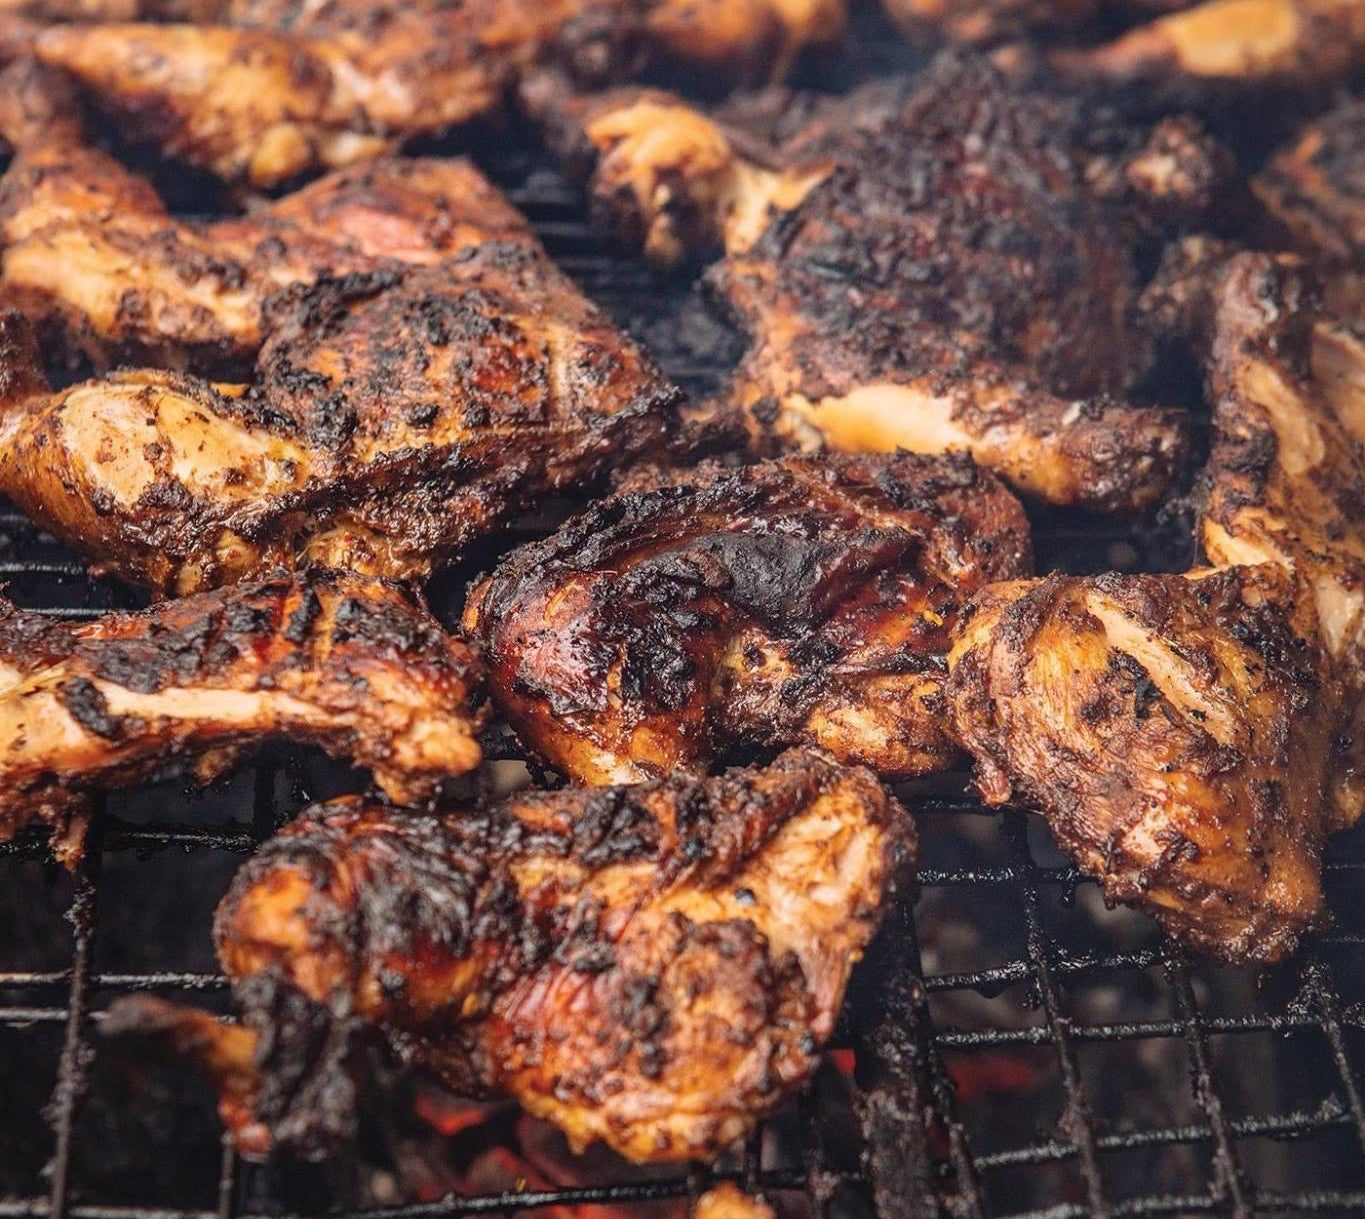 Boom J's on Jerk and how to cook it